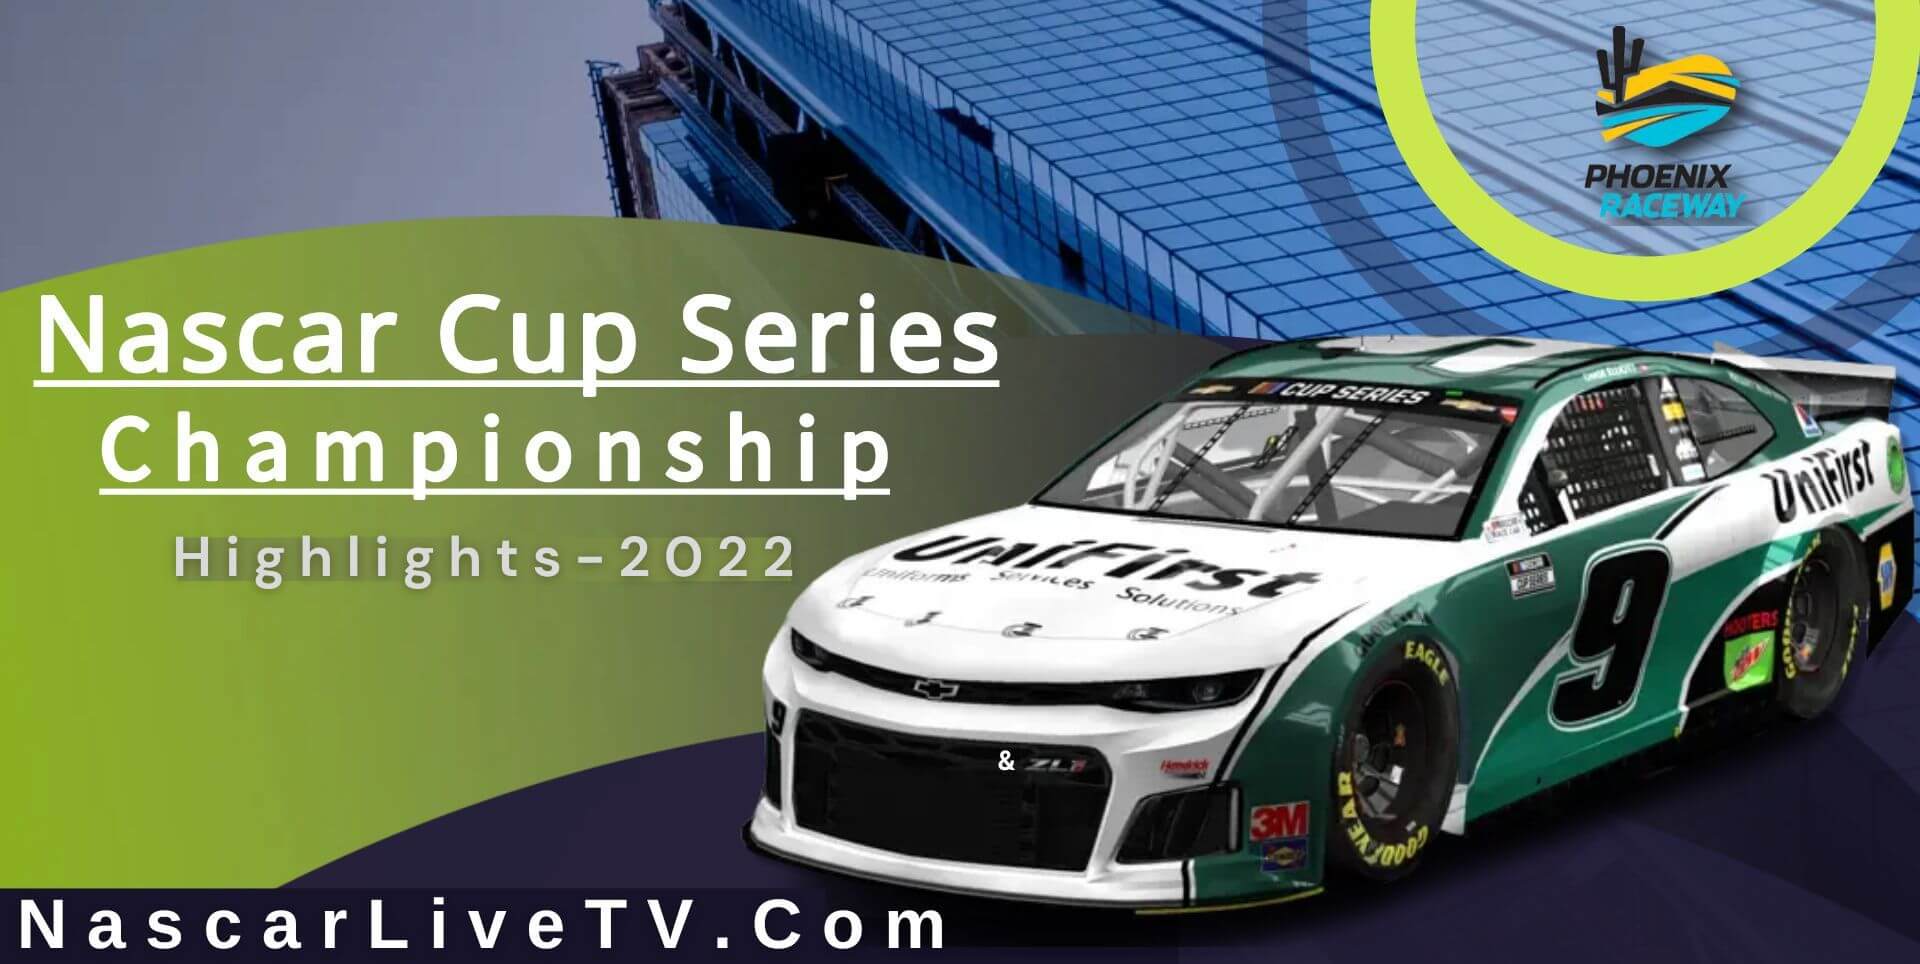 NASCAR Cup Series Highlights Of Championship 2022